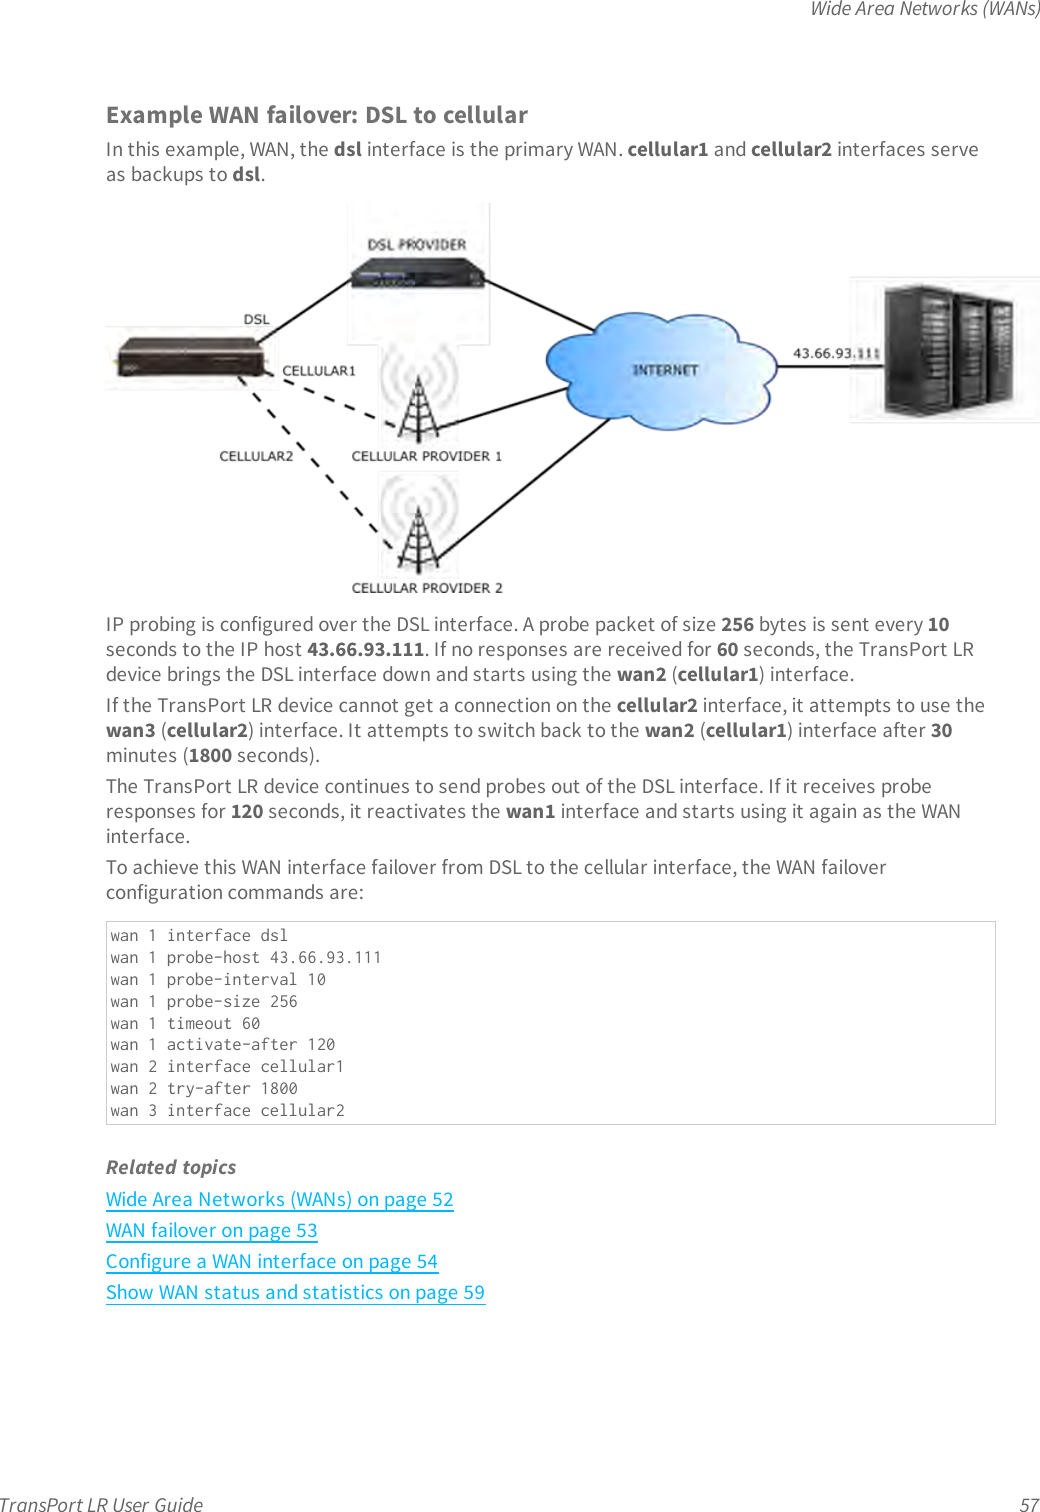 Wide Area Networks (WANs)TransPort LR User Guide 57Example WAN failover: DSLto cellularIn this example, WAN, the dsl interface is the primary WAN. cellular1 and cellular2 interfaces serveas backups to dsl.IPprobing is configured over the DSL interface. A probe packet of size 256 bytes is sent every 10seconds to the IP host 43.66.93.111. If no responses are received for 60 seconds, the TransPort LRdevice brings the DSL interface down and starts using the wan2 (cellular1) interface.If the TransPort LR device cannot get a connection on the cellular2 interface, it attempts to use thewan3 (cellular2) interface. It attempts to switch back to the wan2 (cellular1) interface after 30minutes (1800 seconds).The TransPort LR device continues to send probes out of the DSL interface. If it receives proberesponses for 120 seconds, it reactivates the wan1 interface and starts using it again as the WANinterface.To achieve this WAN interface failover from DSLto the cellular interface, the WANfailoverconfiguration commands are:wan 1 interface dslwan 1 probe-host 43.66.93.111wan 1 probe-interval 10wan 1 probe-size 256wan 1 timeout 60wan 1 activate-after 120wan 2 interface cellular1wan 2 try-after 1800wan 3 interface cellular2Related topicsWide Area Networks (WANs) on page 52WAN failover on page 53Configure a WANinterface on page 54Show WAN status and statistics on page 59